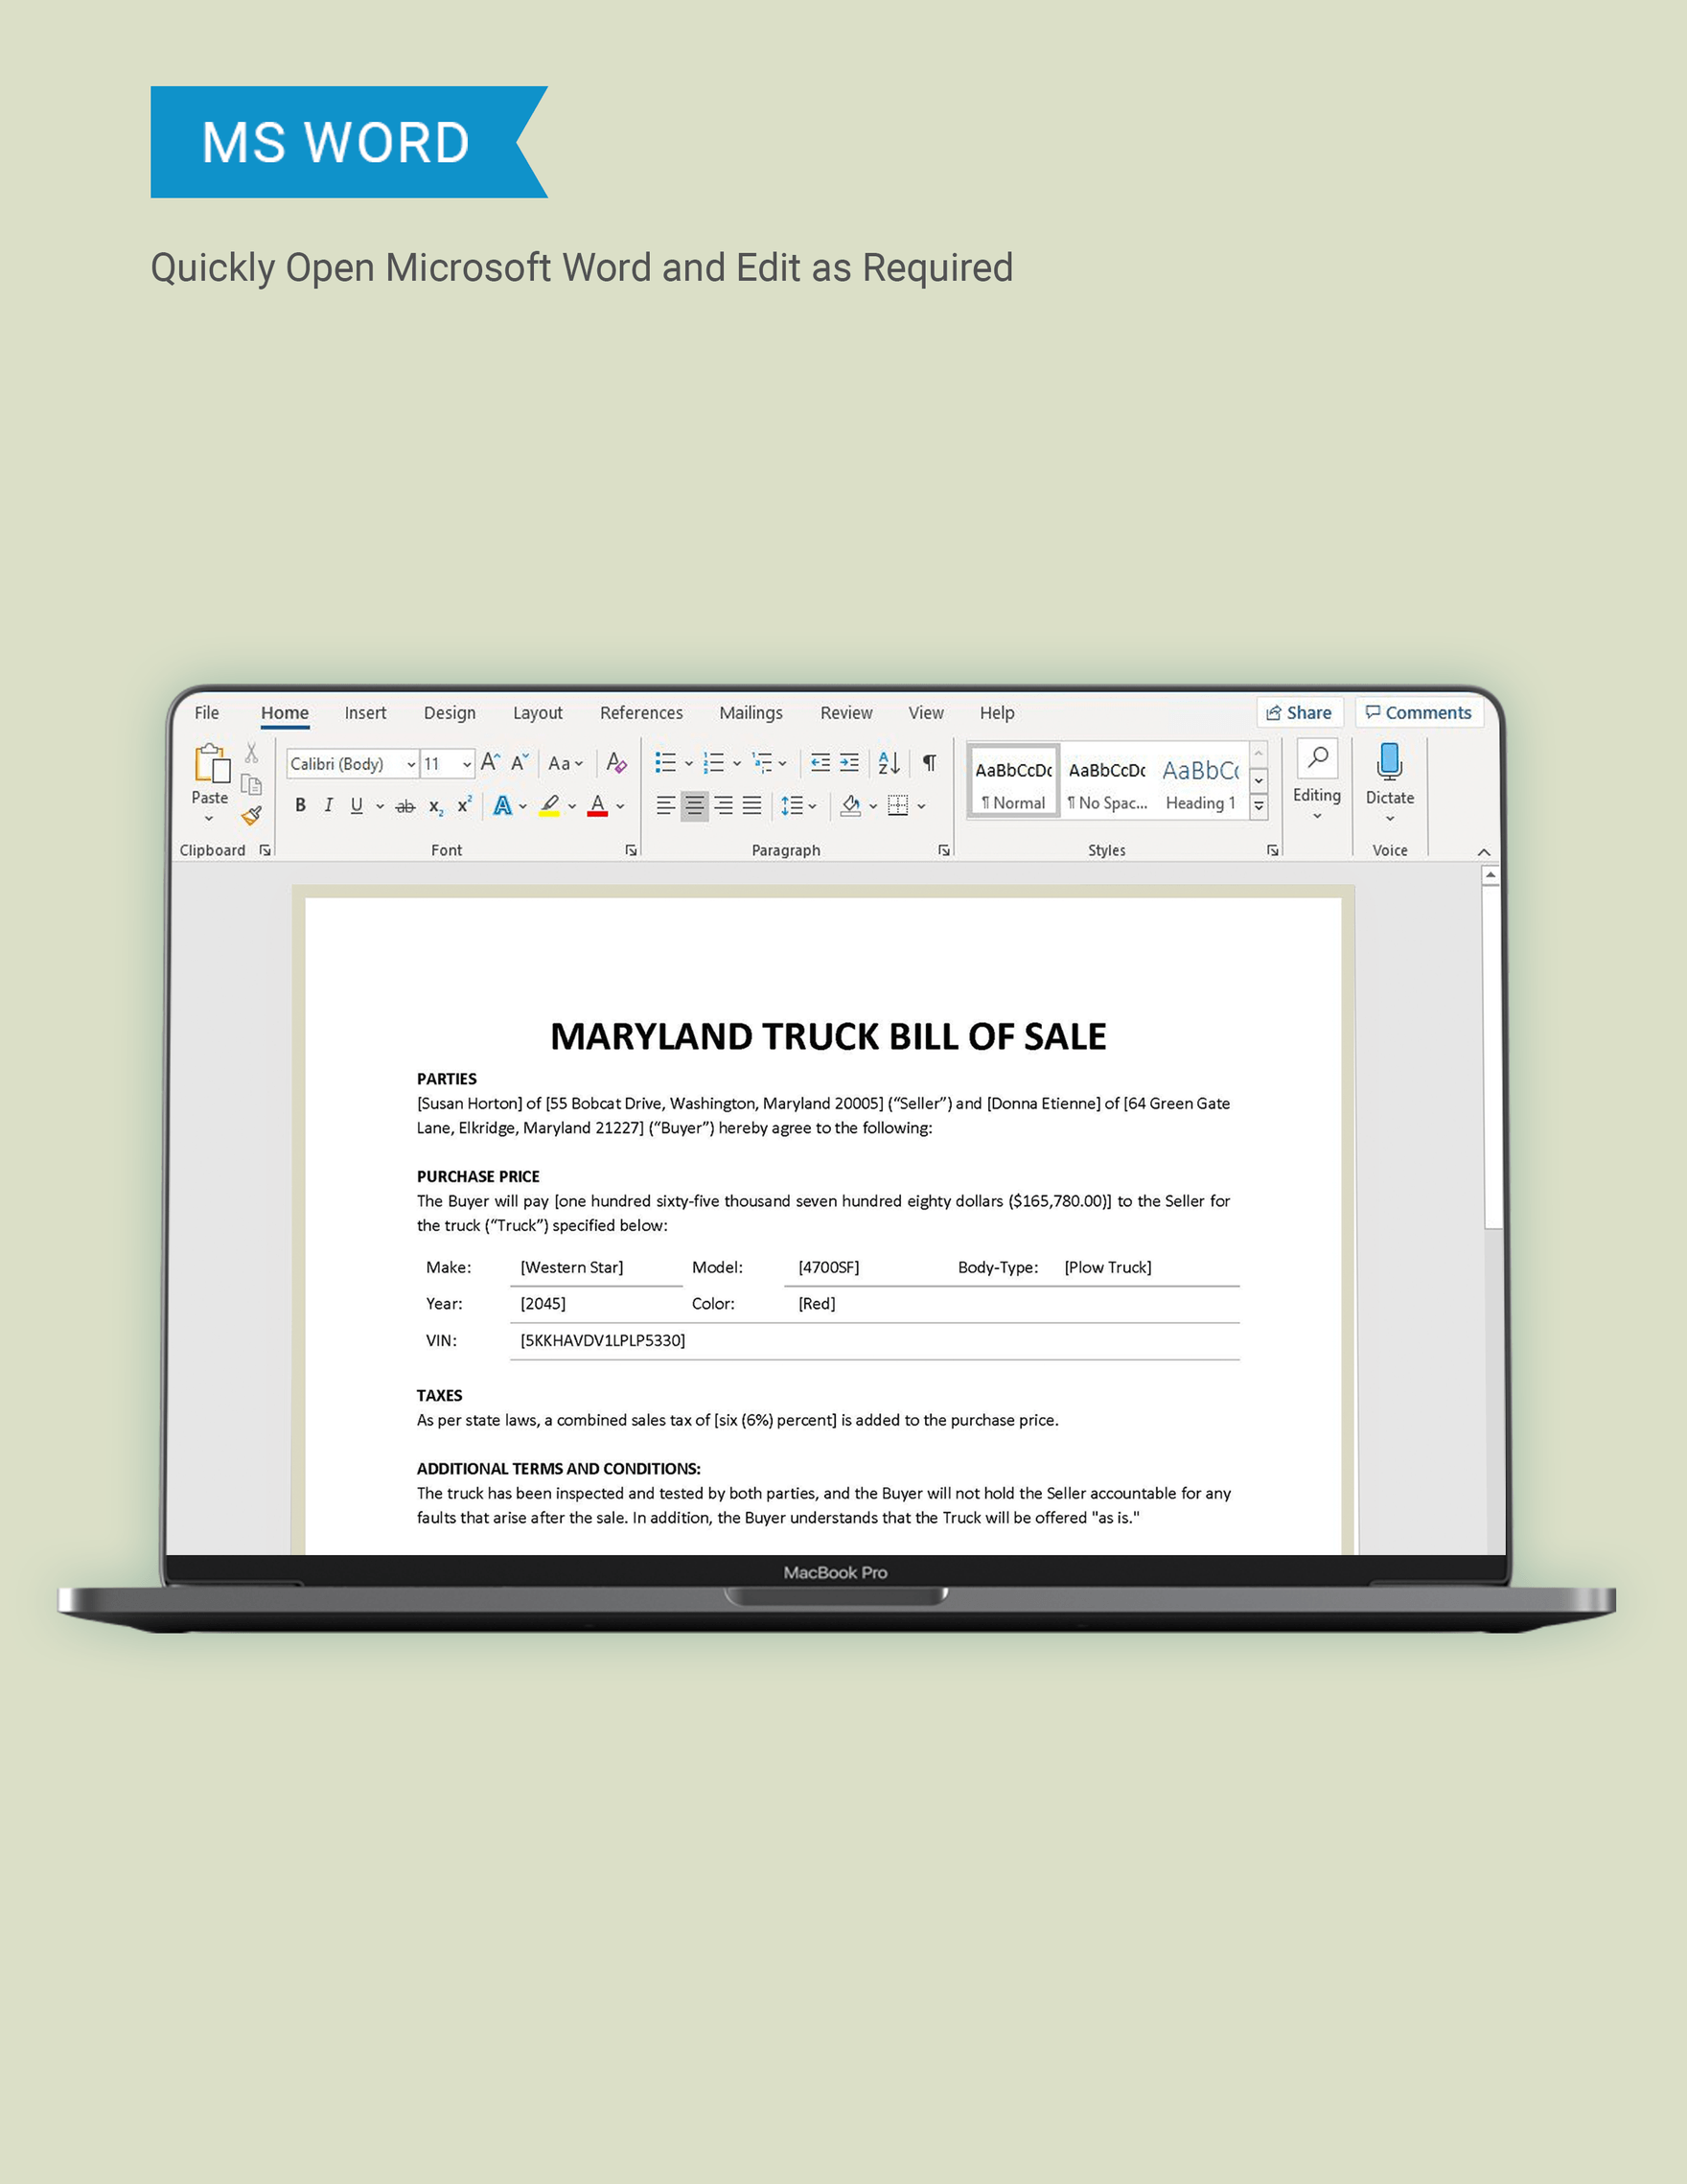 Maryland Truck Bill of Sale Template